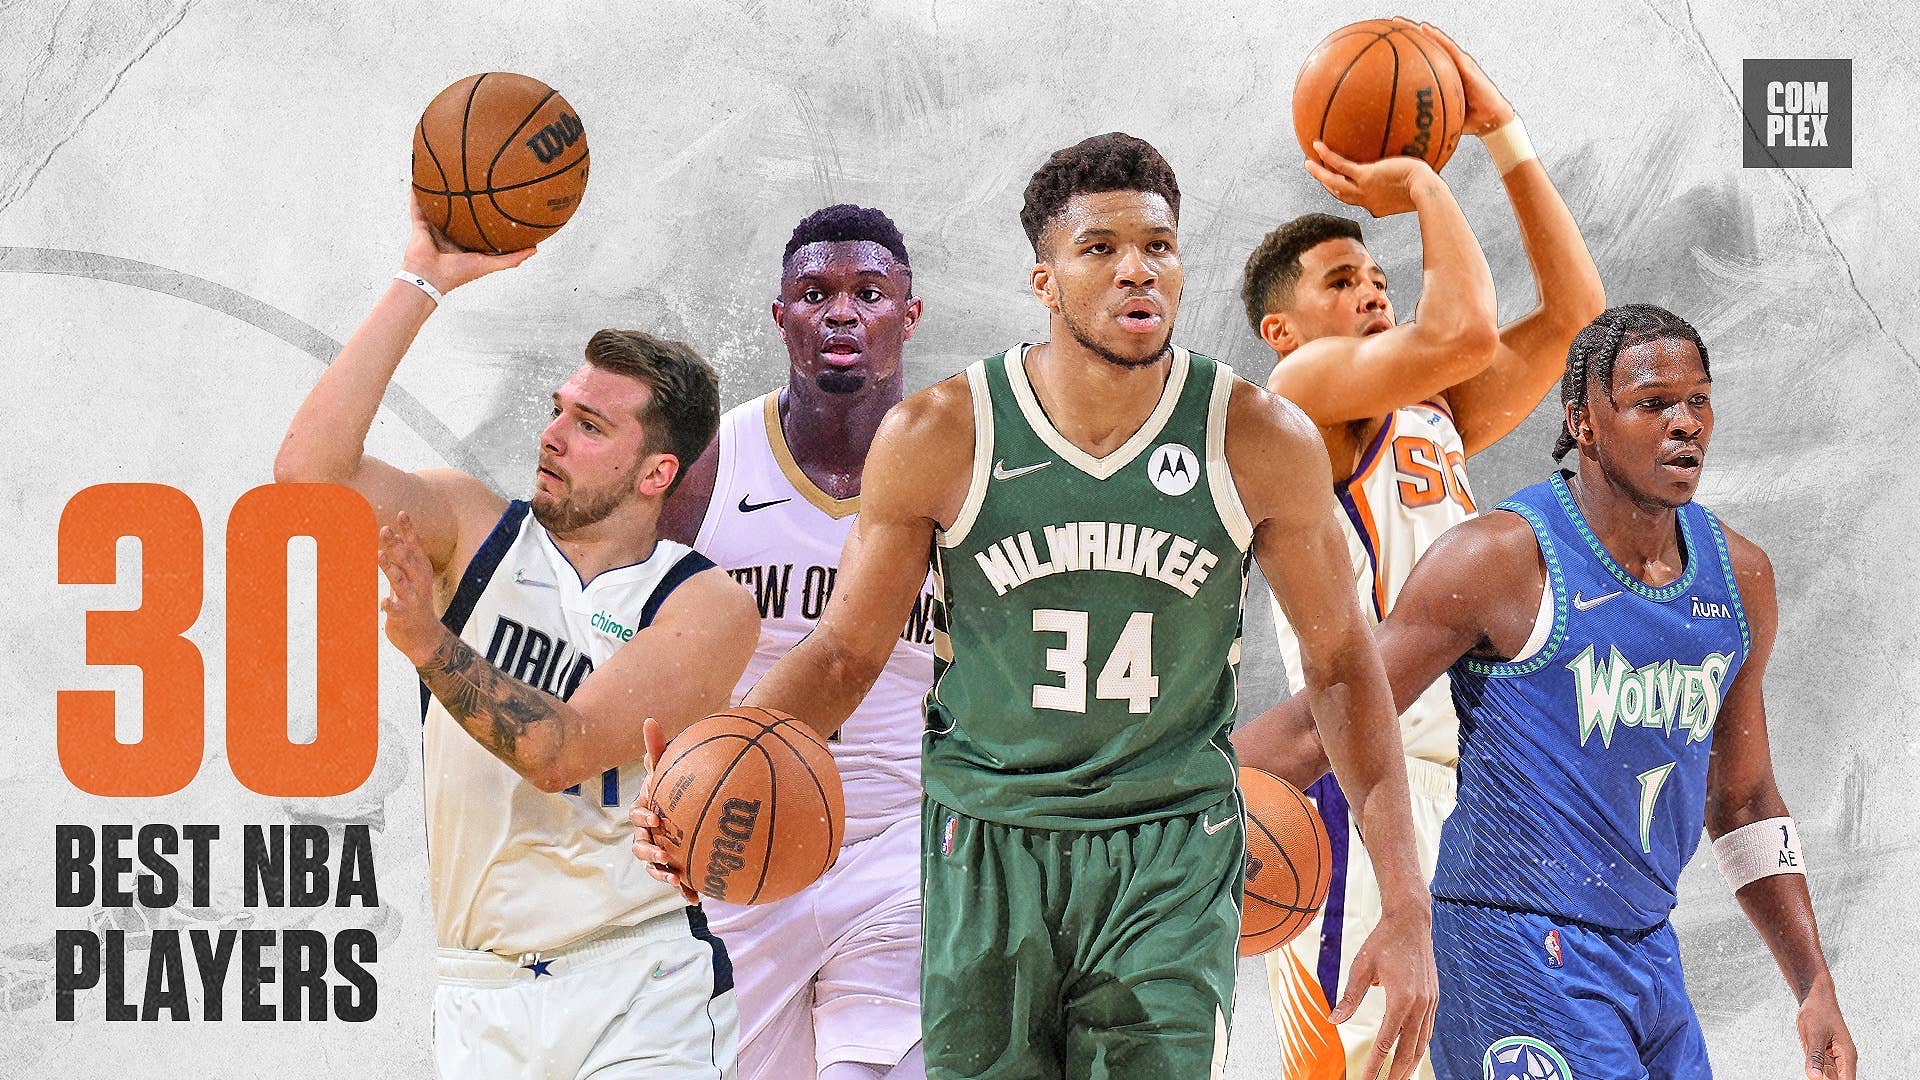 The Best 30 NBA Players